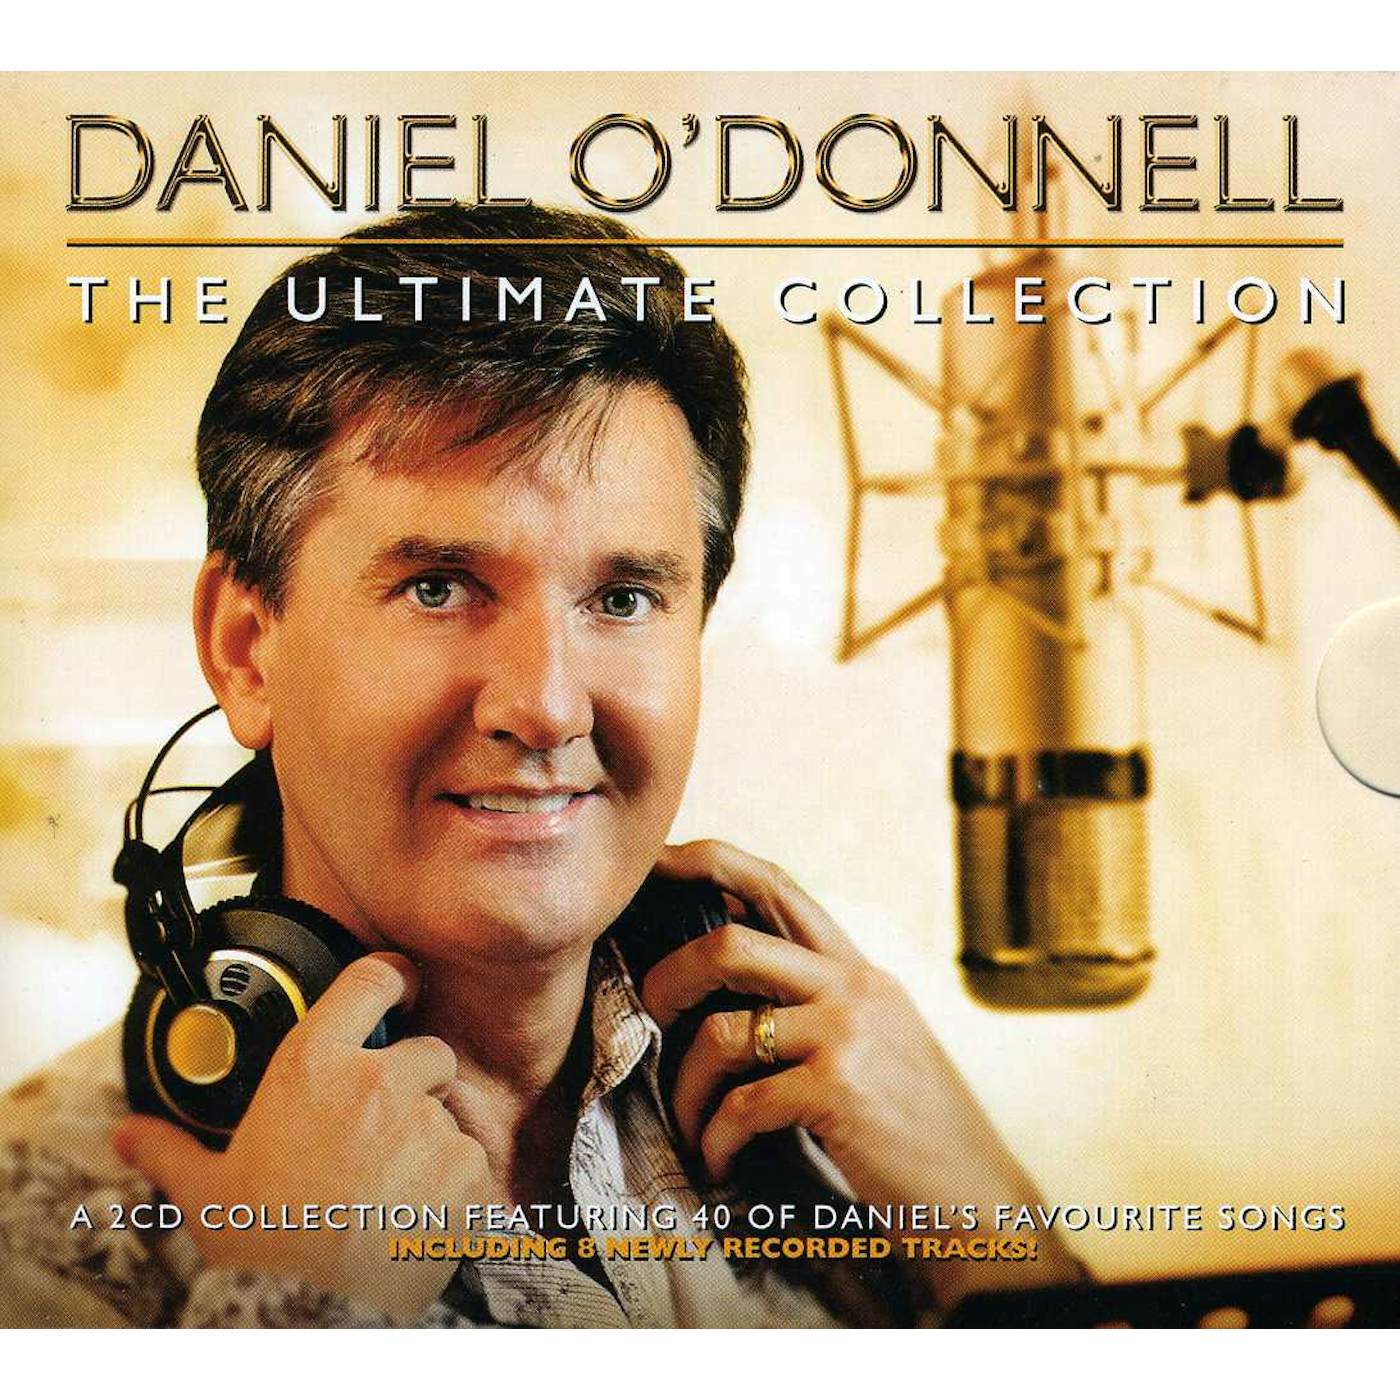 Daniel O'Donnell ULTIMATE COLLECTION: 30TH ANNIVERSARY COLLECTION CD